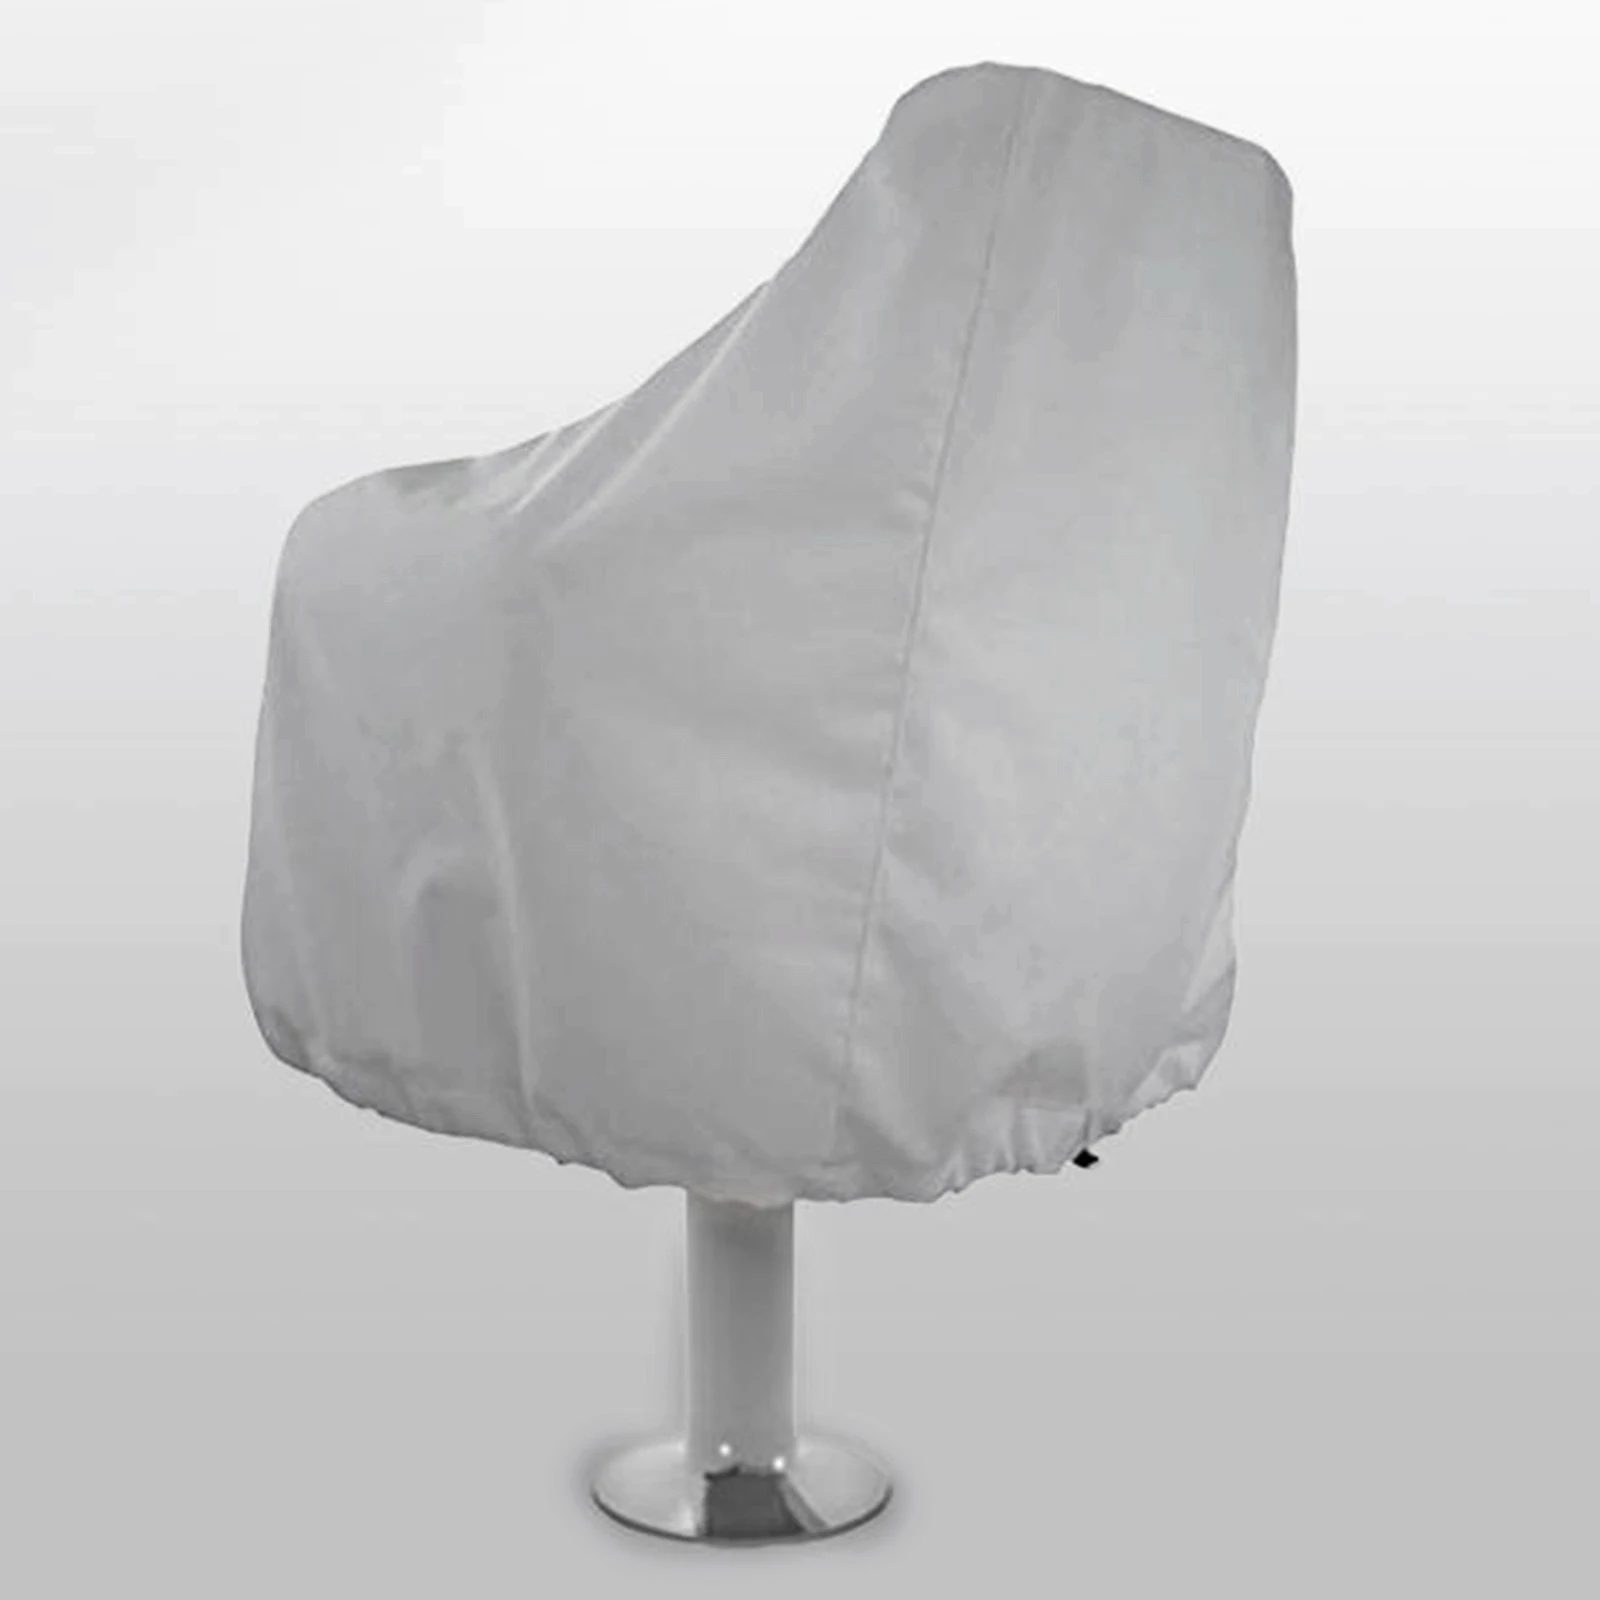 Anti Dust Solid Boat Seat Cover Outdoor Waterproof UV Resistant Oxford Cloth